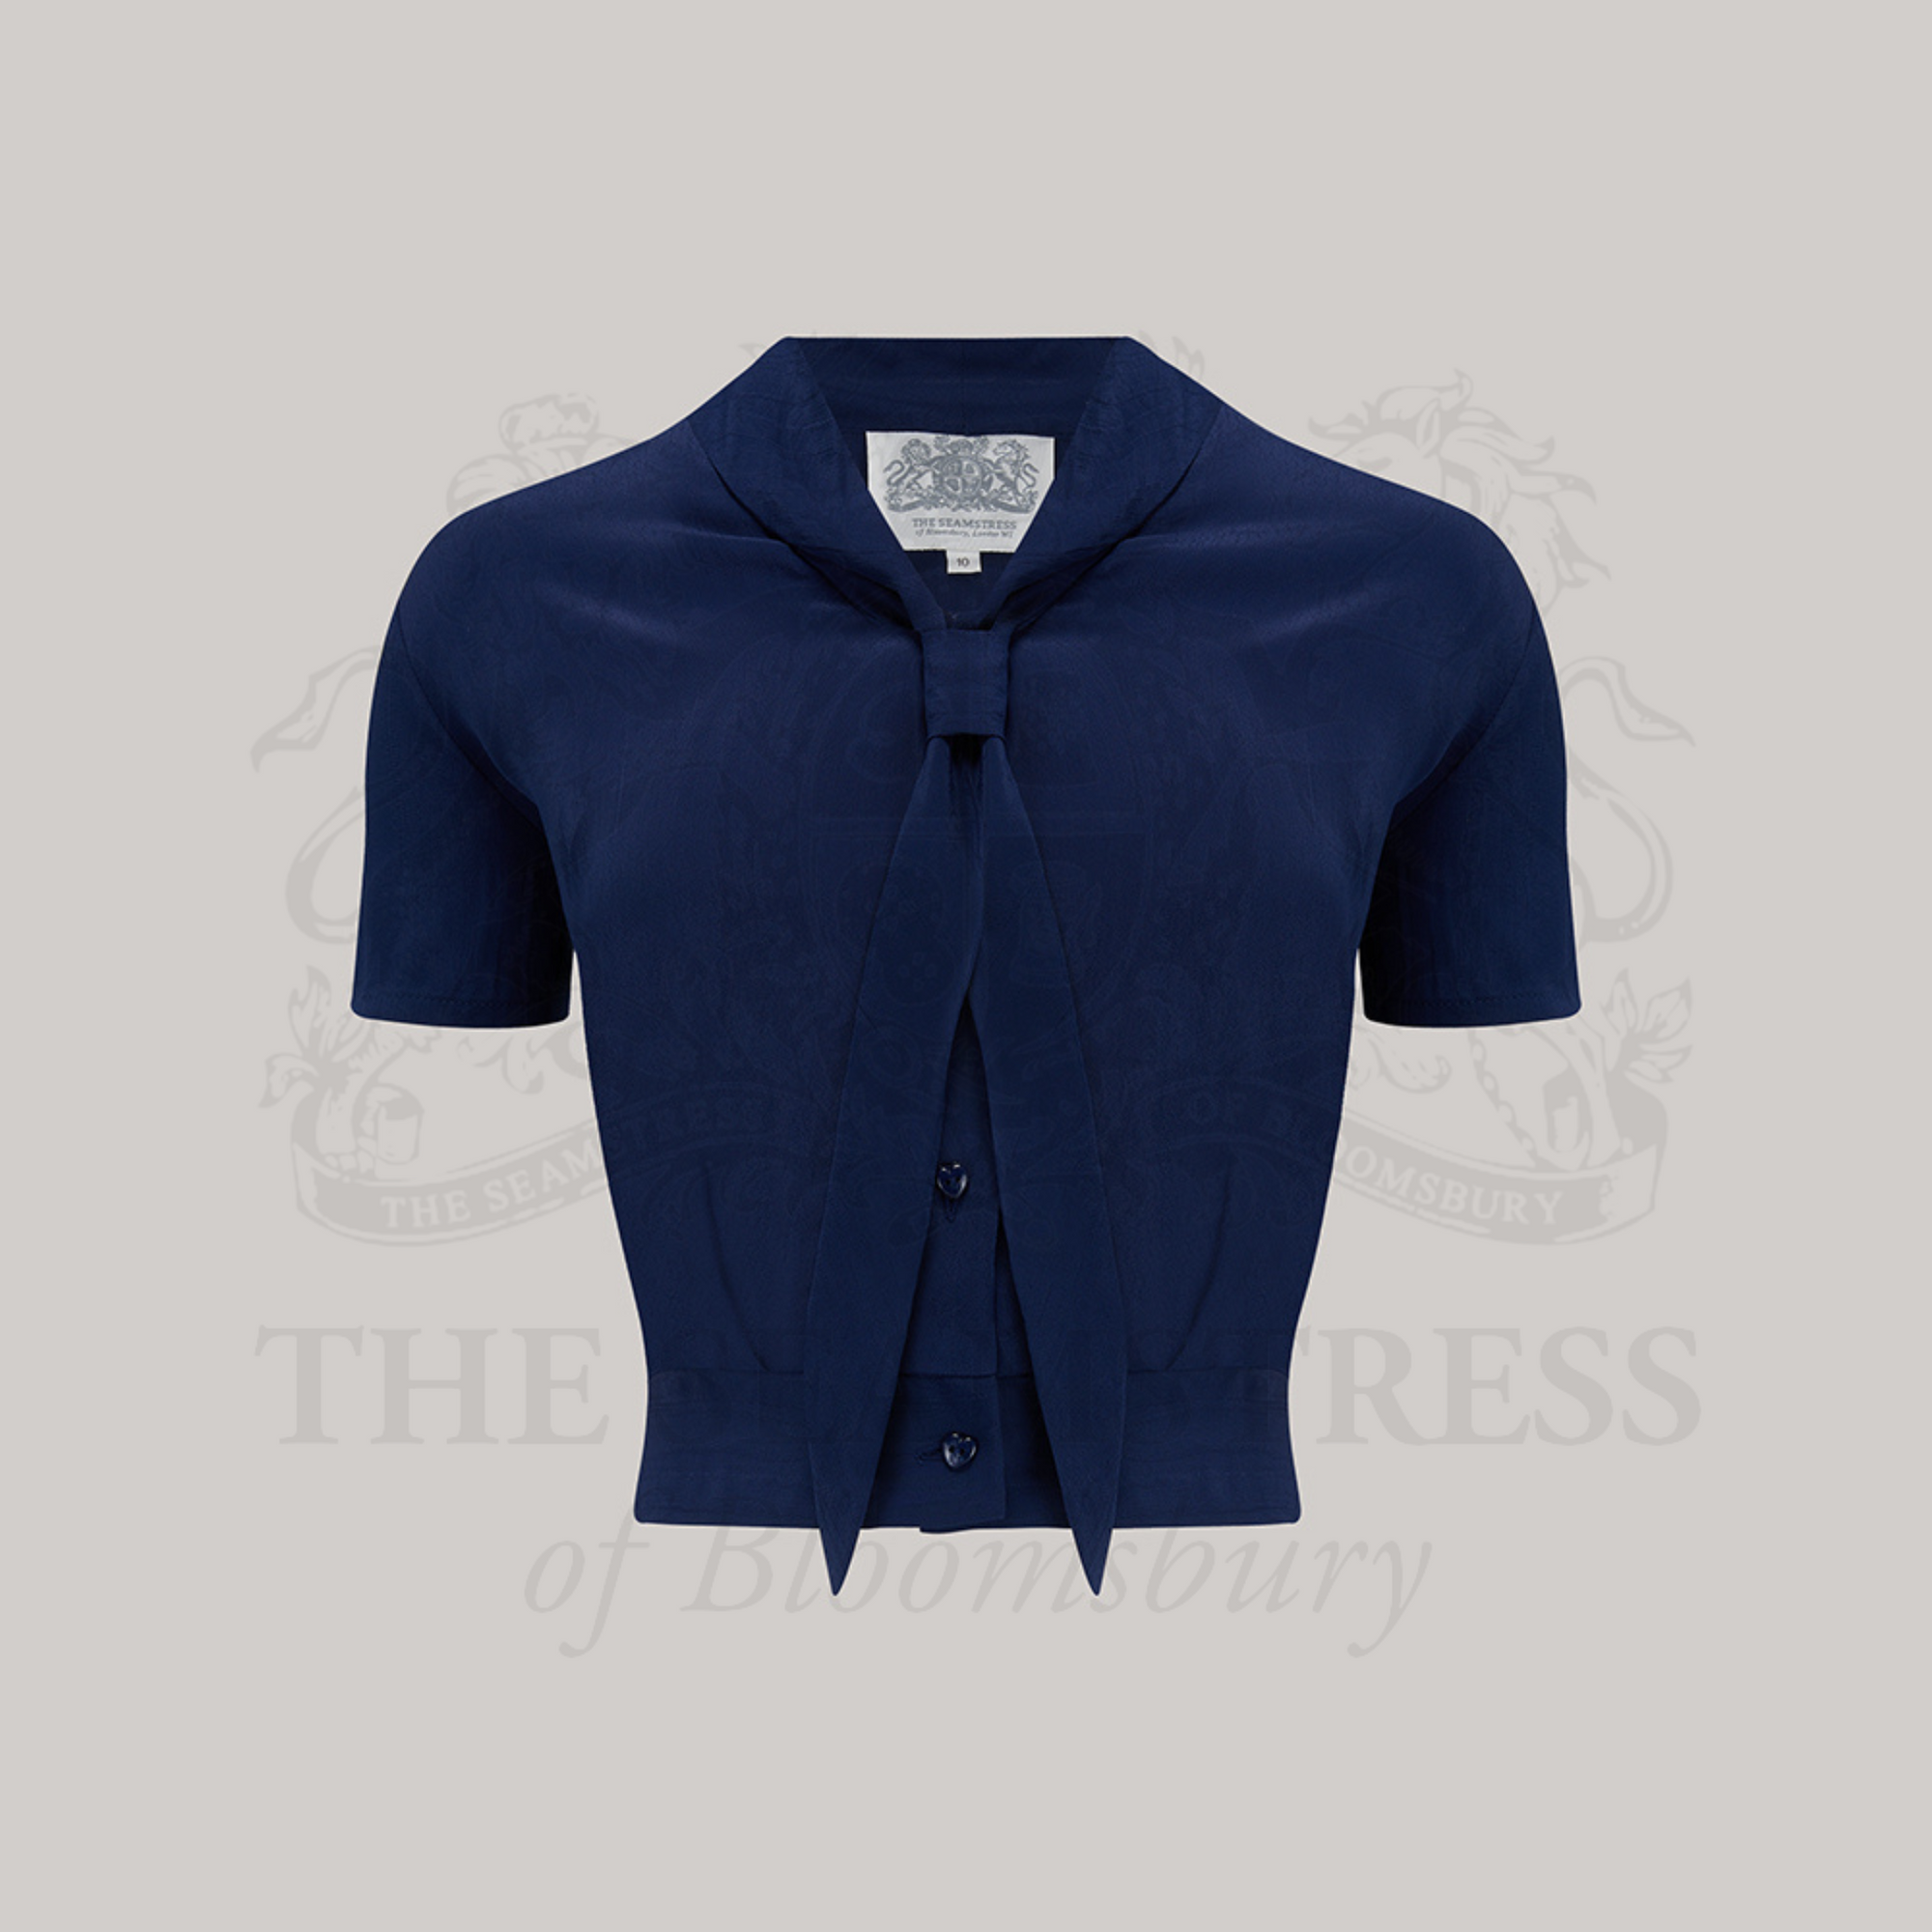 A 1940s sailor style blouse with short sleeves in navy. Featuring a roll style collar to give the iconic sailor look. Small buttons run down the front of the blouse for fastening but are hidden by the long collar.